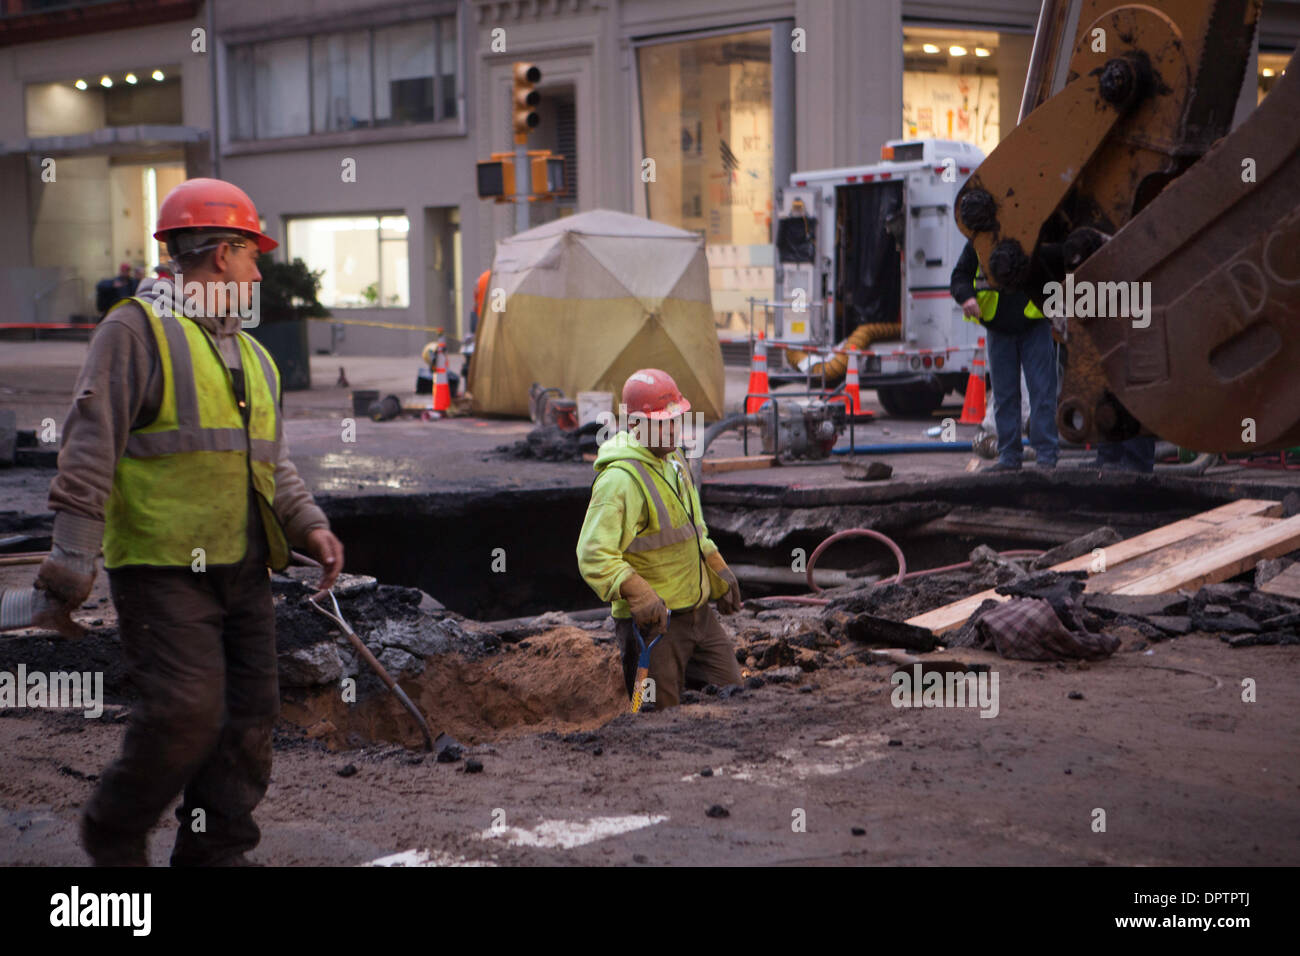 New York, USA. 15th January 2014. Crews from the DEP and ConEd continue to excavate to locate a water main break that flooded 5th Ave in Greenwich Village and left several nearby buildings without water.  Workers estimate it will take several days to locate and repair the break. Credit:  Mansura Khanam/Alamy Live News Stock Photo